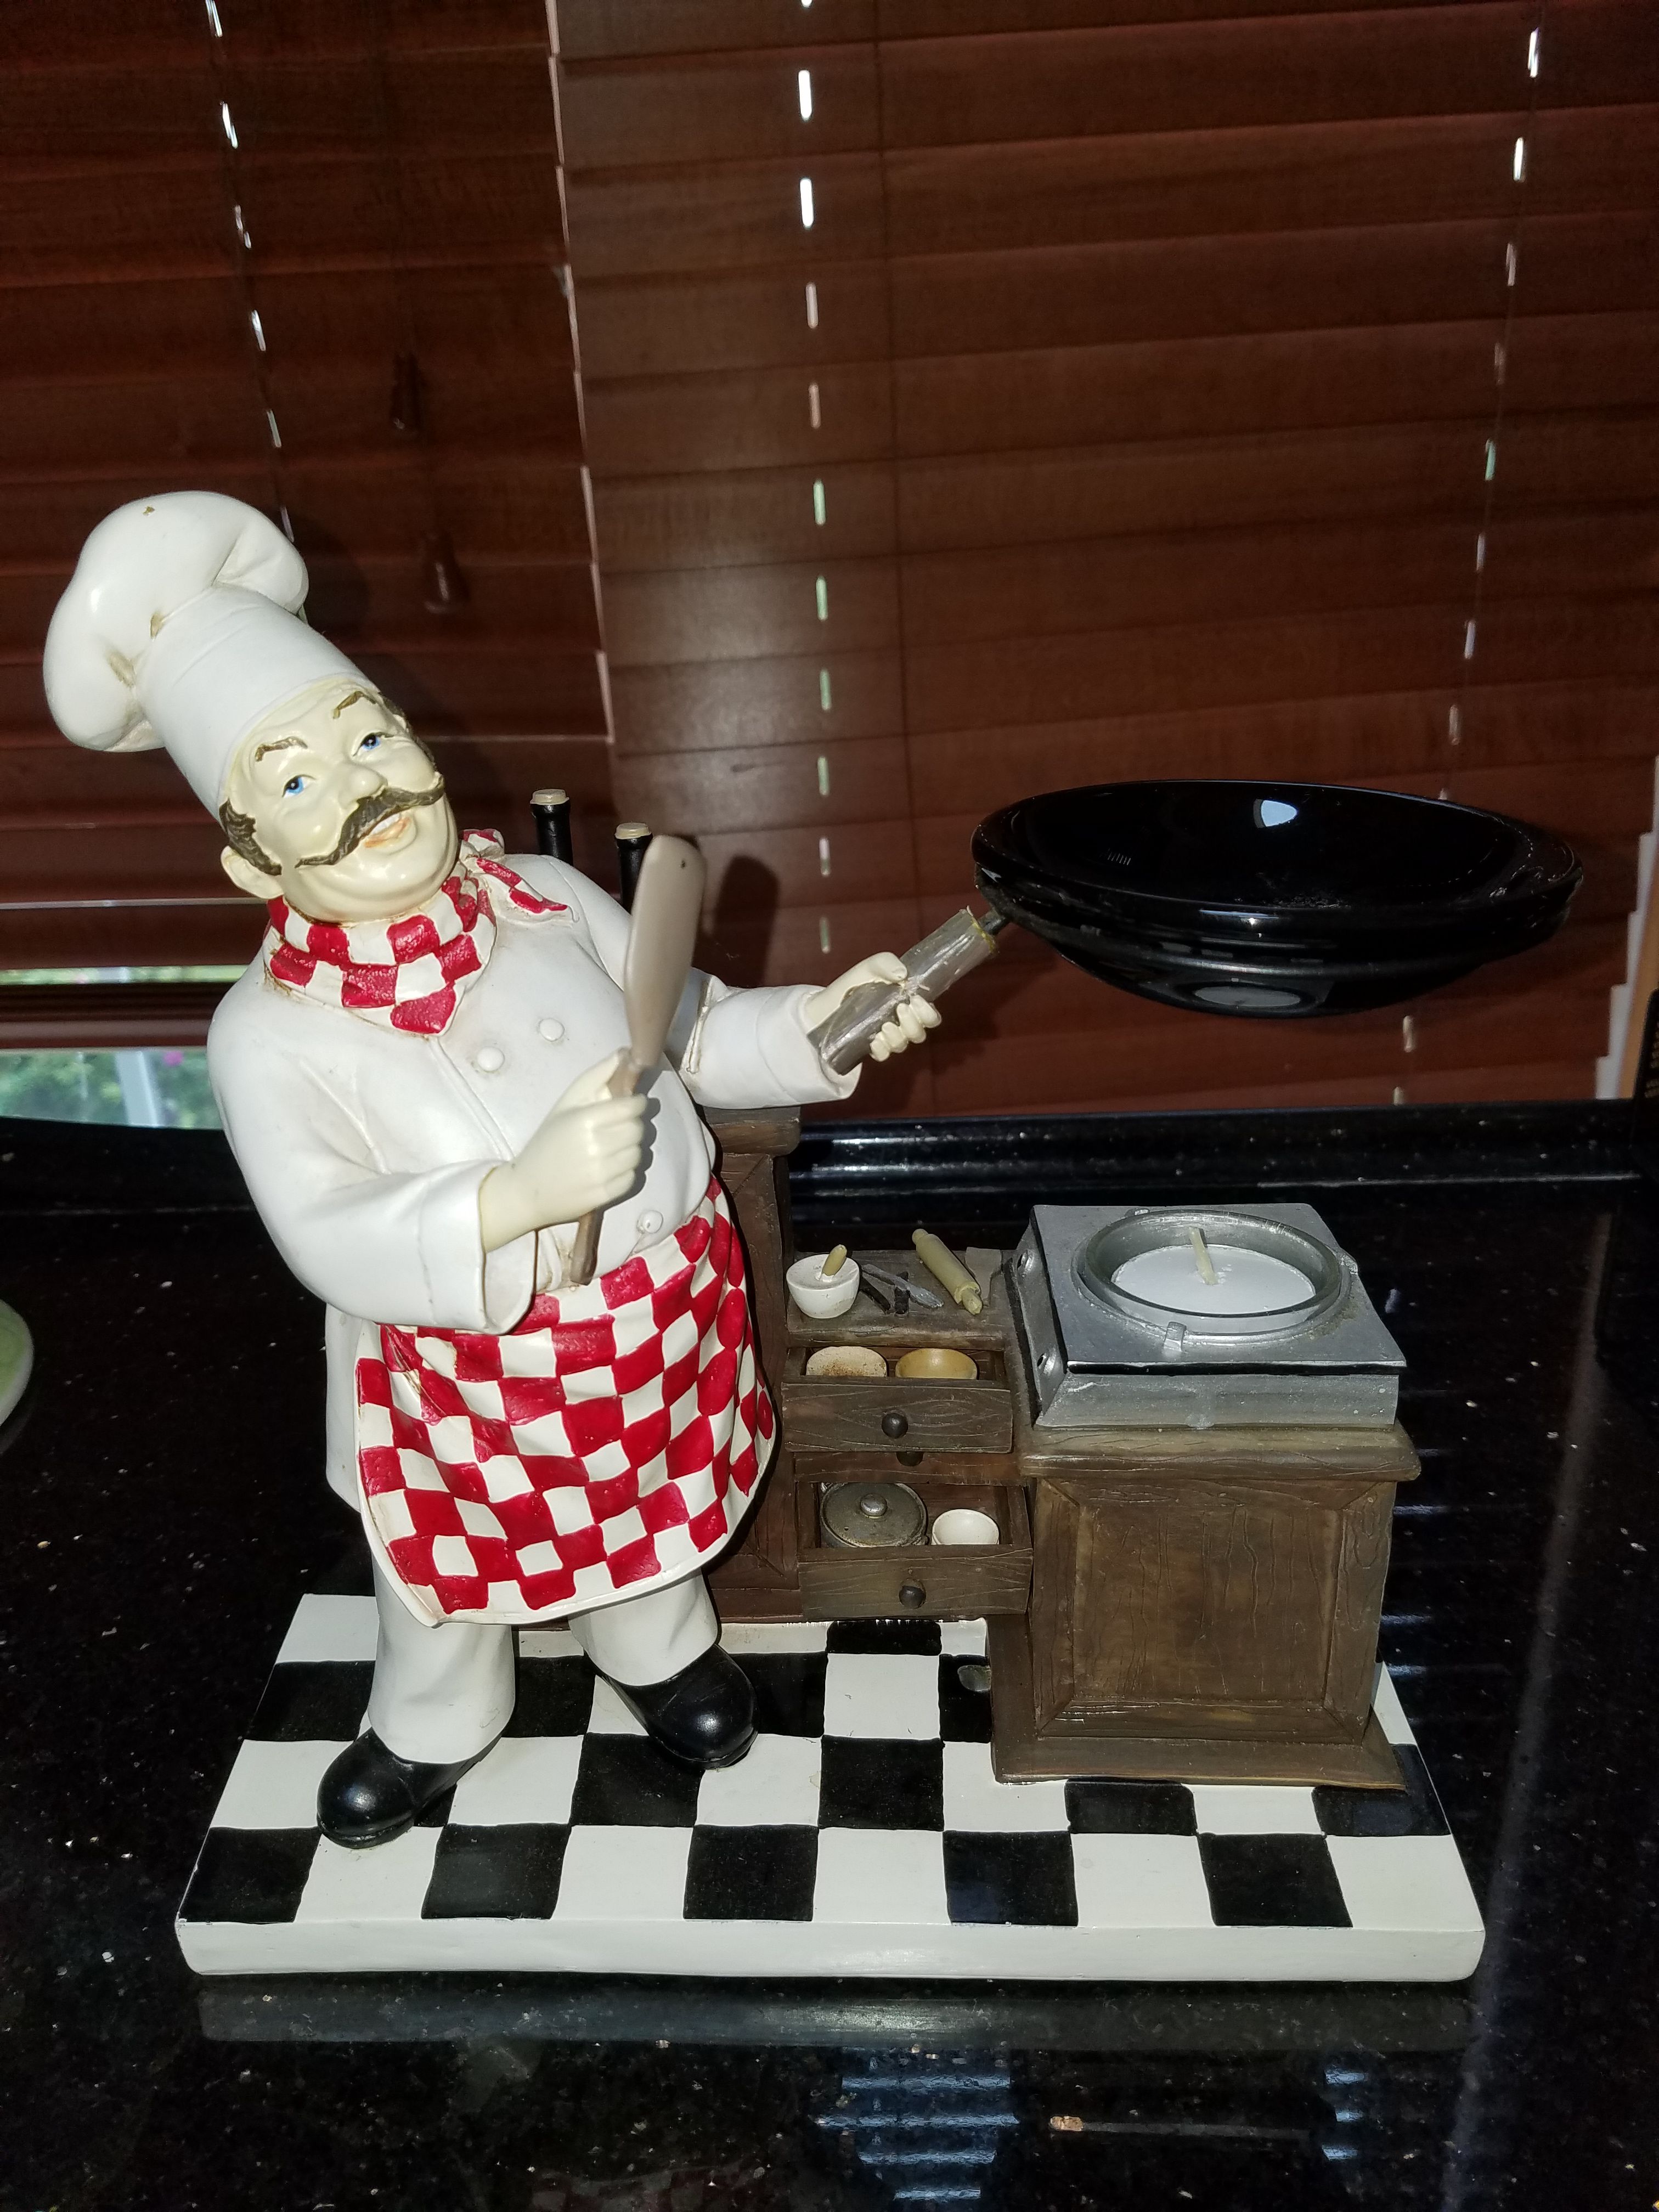 YANKEE CANDLE COMPANY CHEF TEALIGHT STATUE